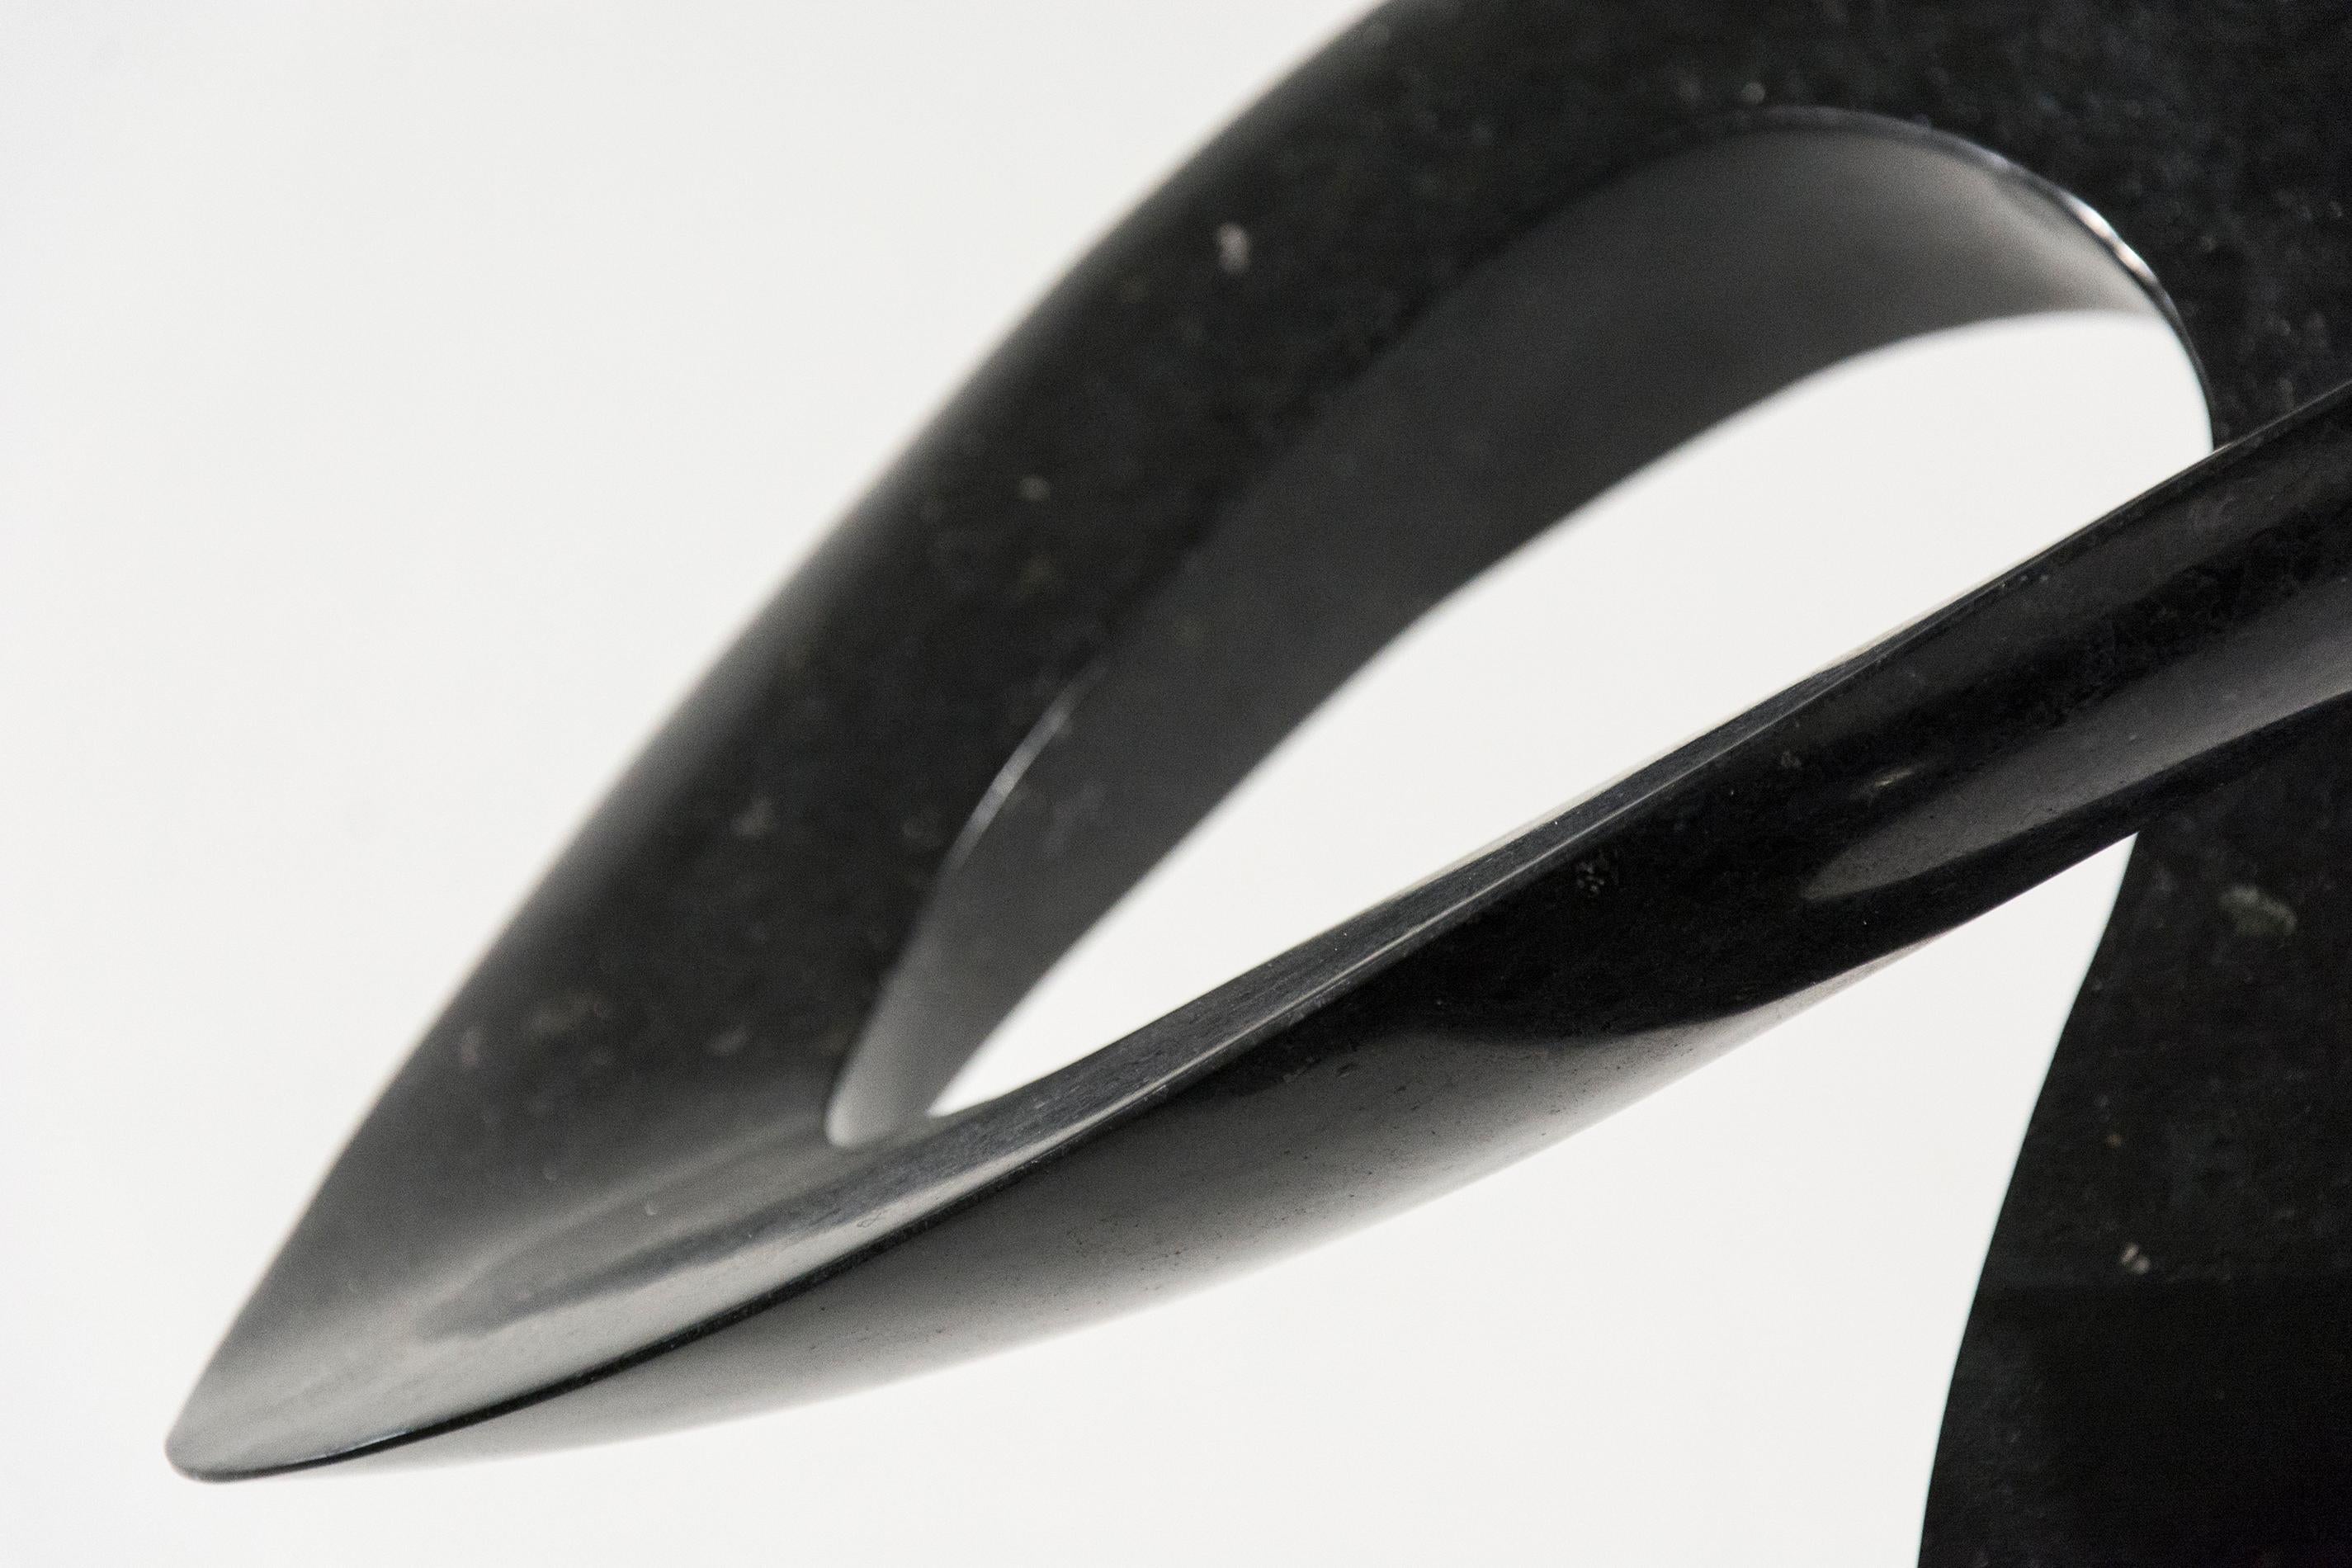 Smooth surfaced, engineered black granite is sculpted into an elegant, spinning form by Jeremy Guy. This lively shape that appears to spin dynamically on its narrow base, like a pirouette on one foot, is mounted on a square granite base. 

Jeremy